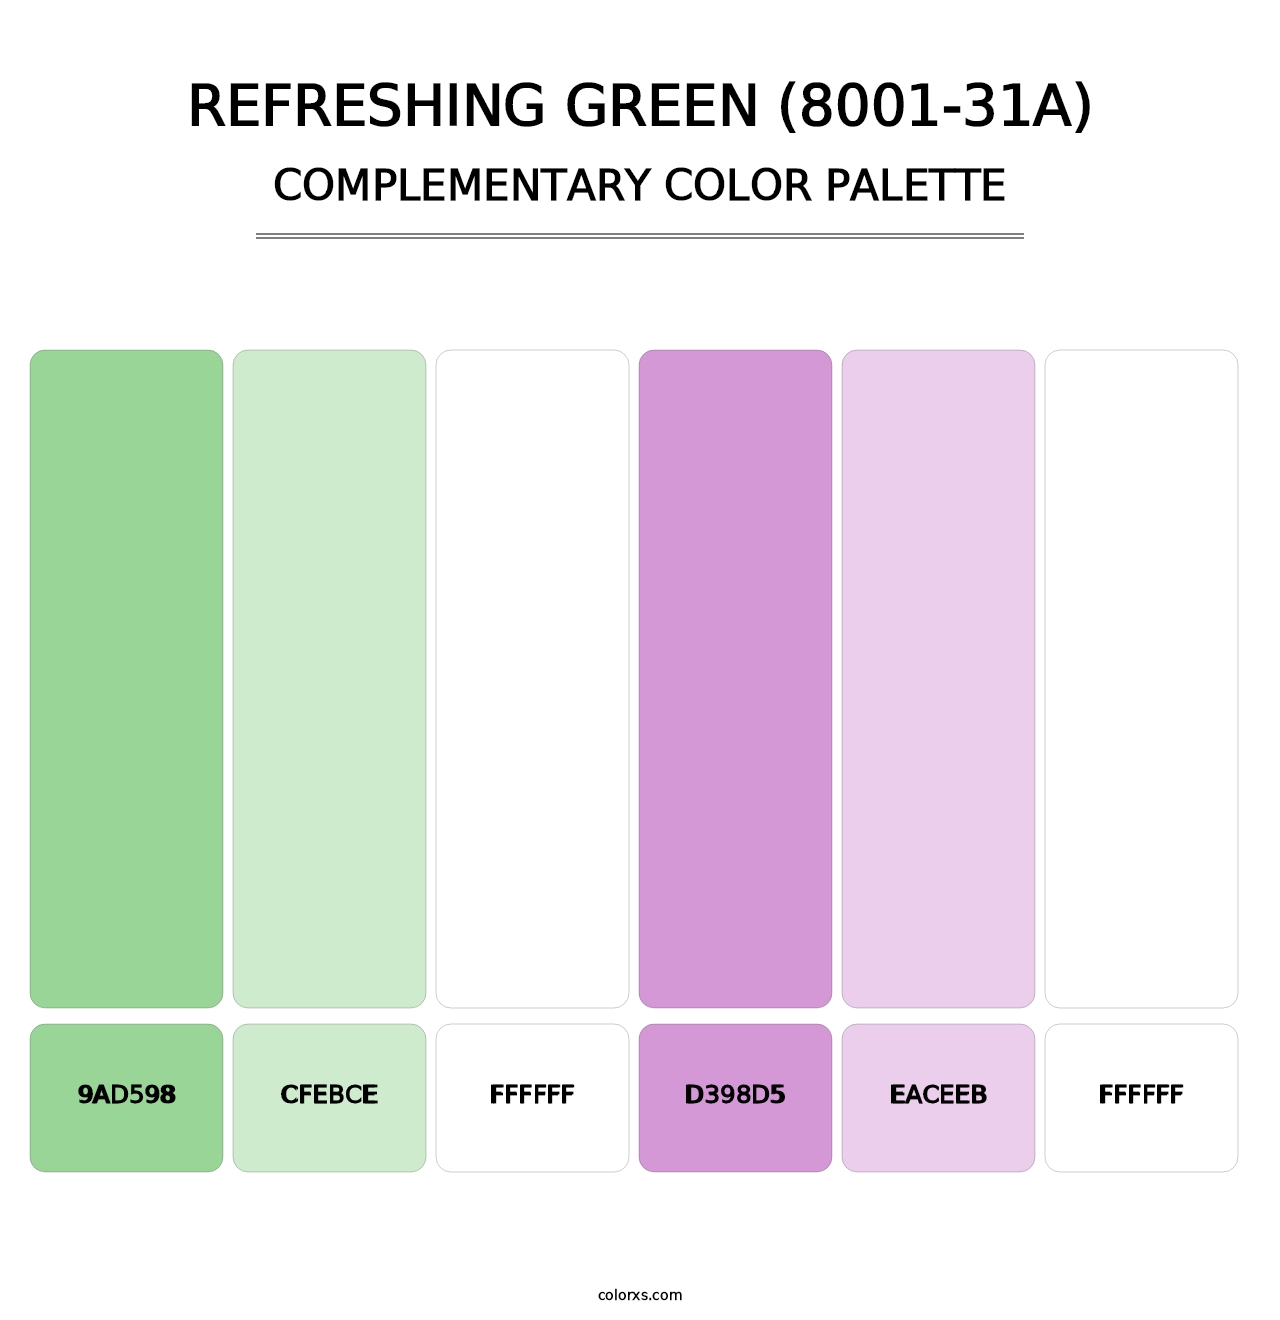 Refreshing Green (8001-31A) - Complementary Color Palette